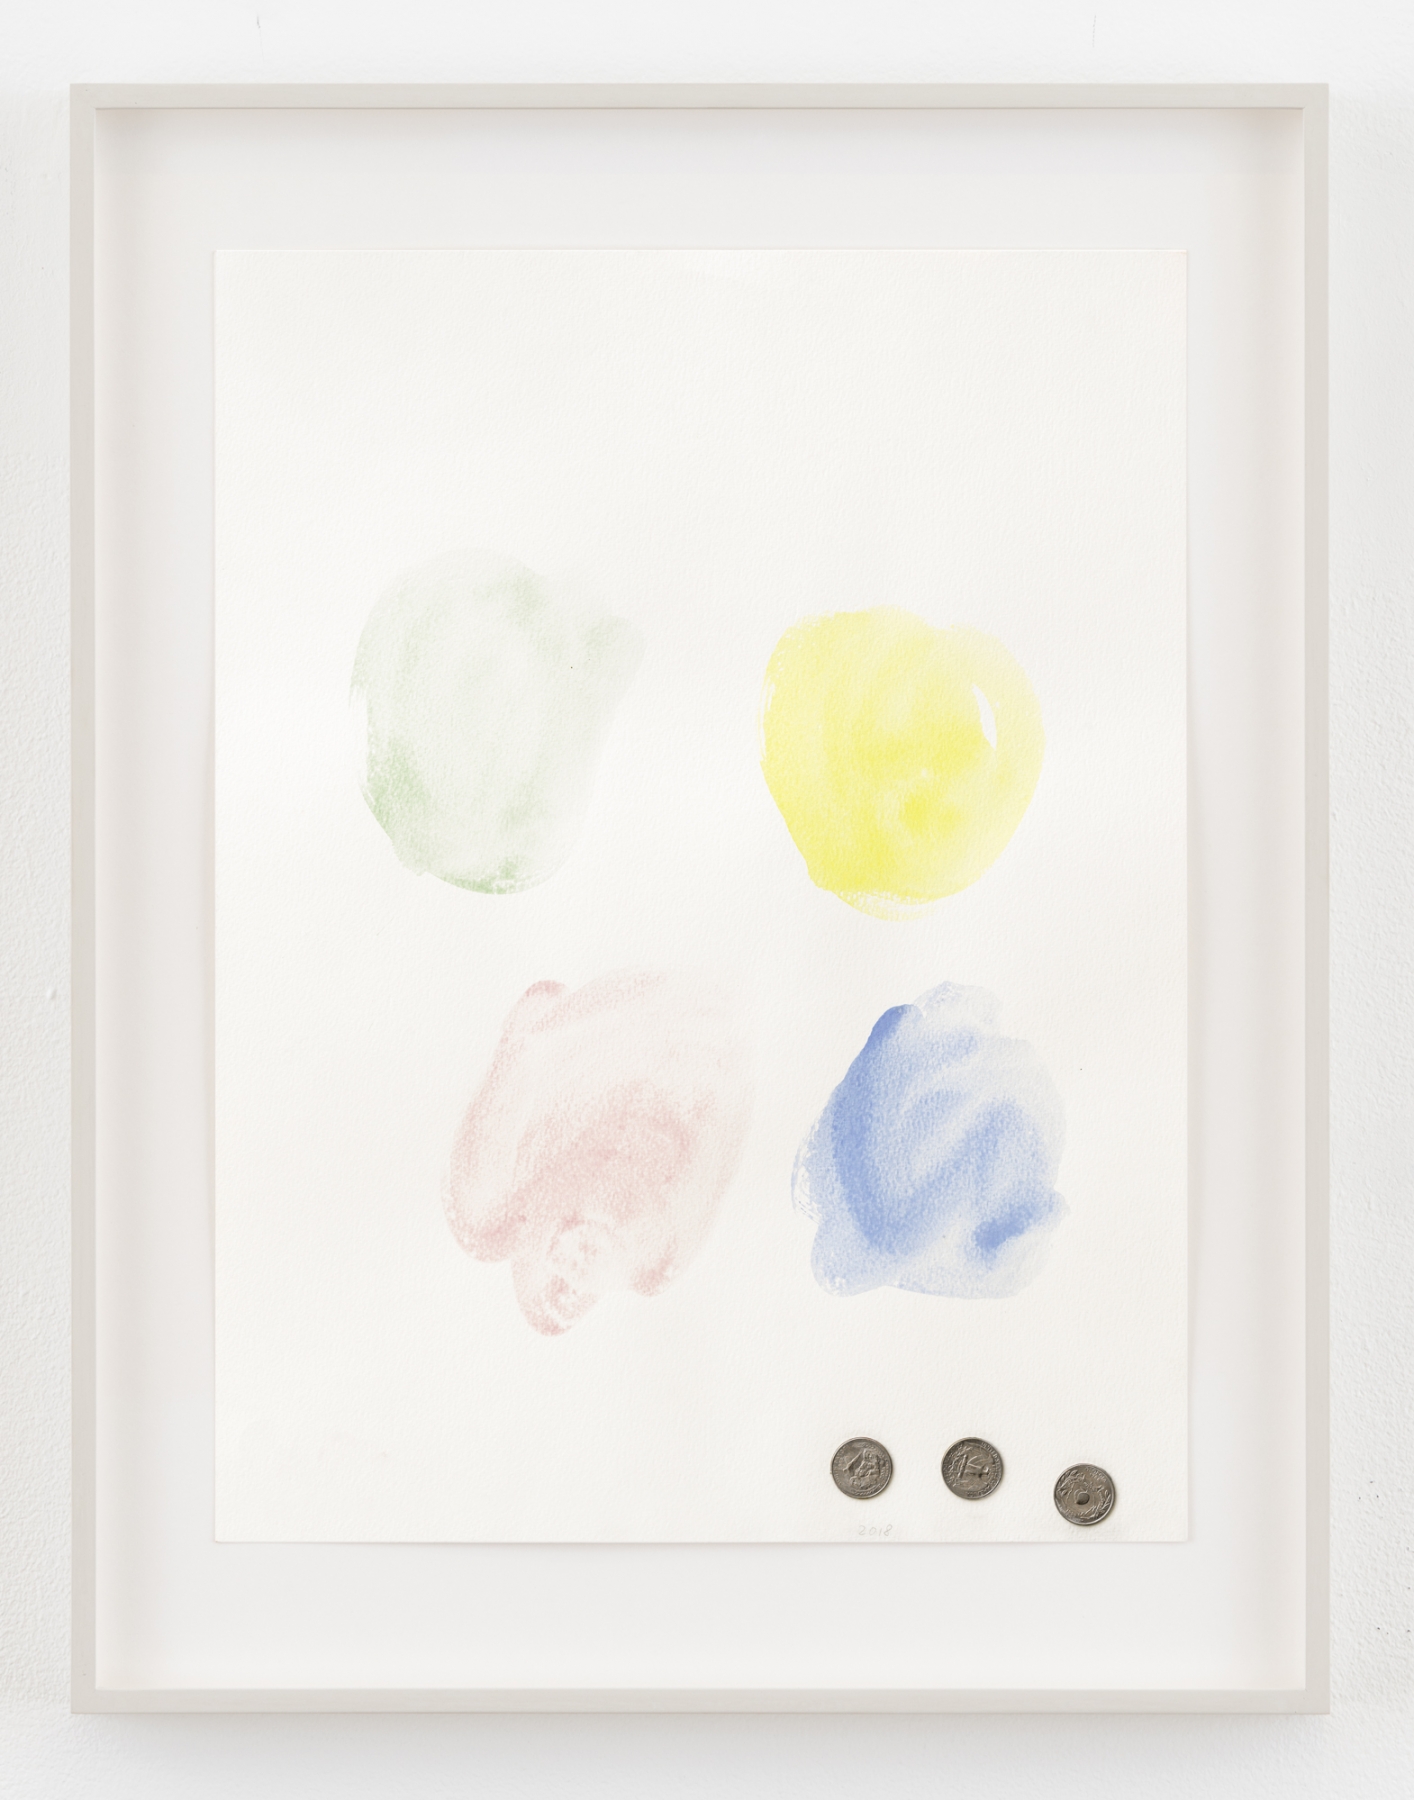 Monika Baer
4 Colors and 75&cent;, 2018/2021
Watercolor and coins on paper
Paper: 20 x 15 inches (50.8 x 38.1 cm)
Frame: 25 1/8 x 19 3/8 x 1 3/8 inches (63.8 x 49.2 x 3.5 cm)